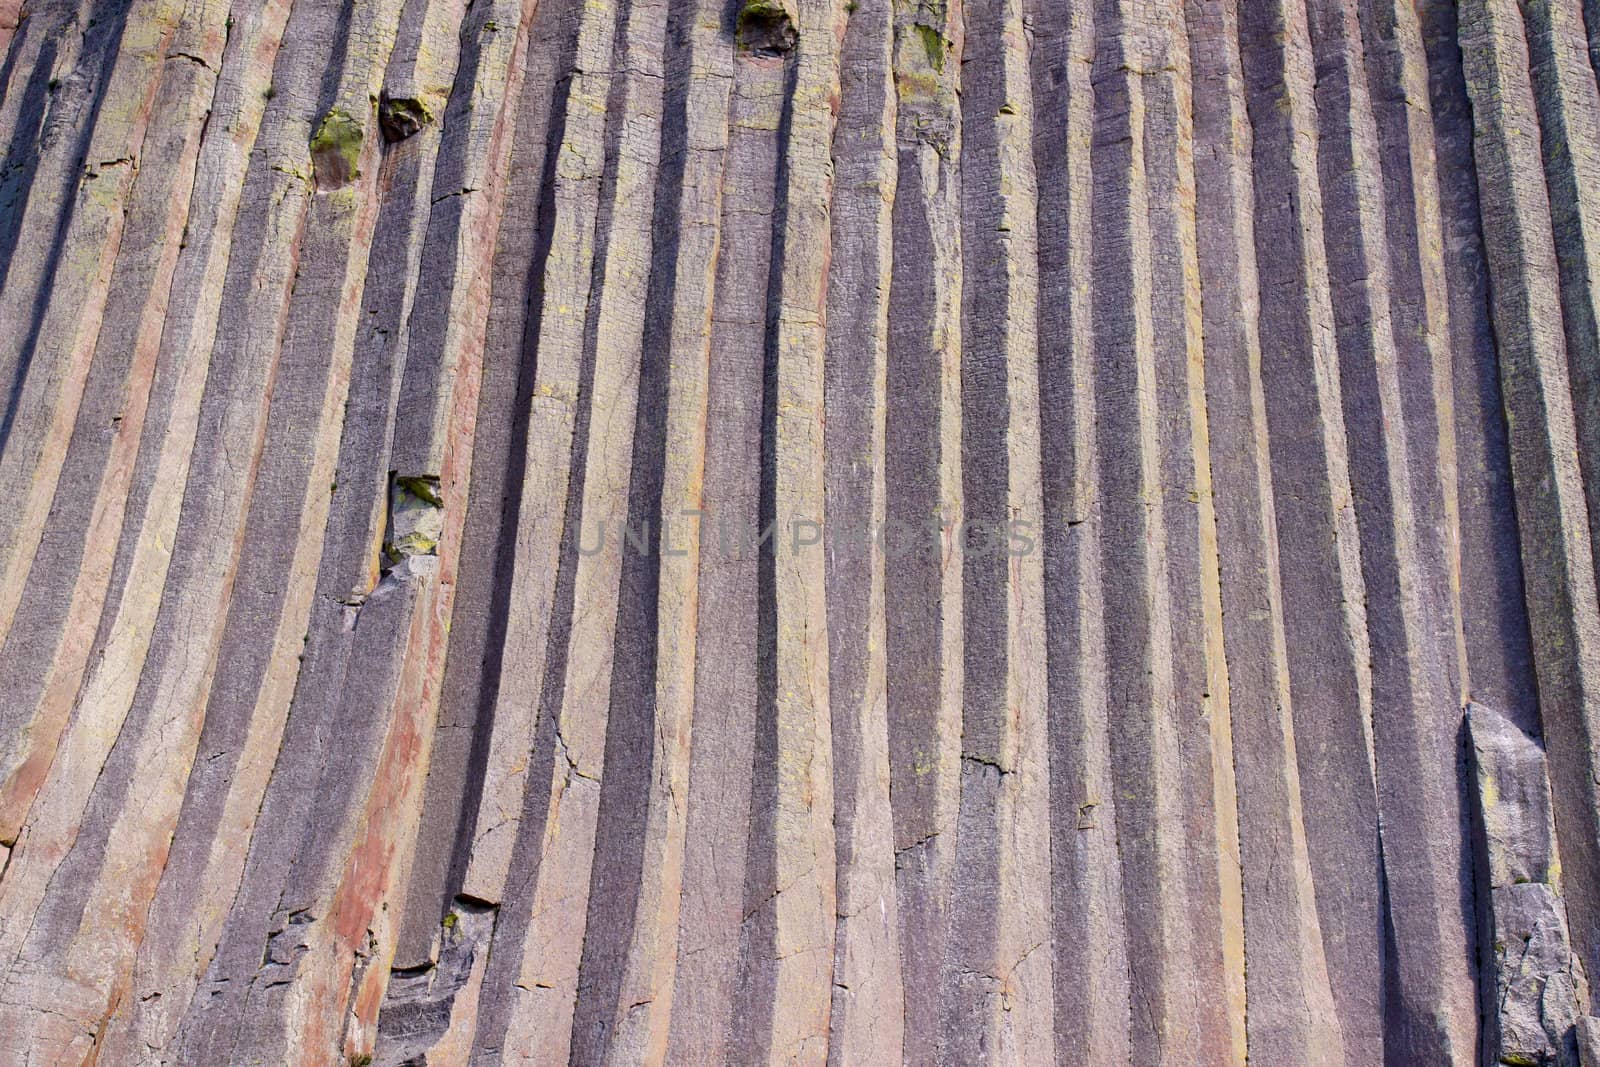 Zoomed in shot of Devils Tower National Monument showing interesting geological features.